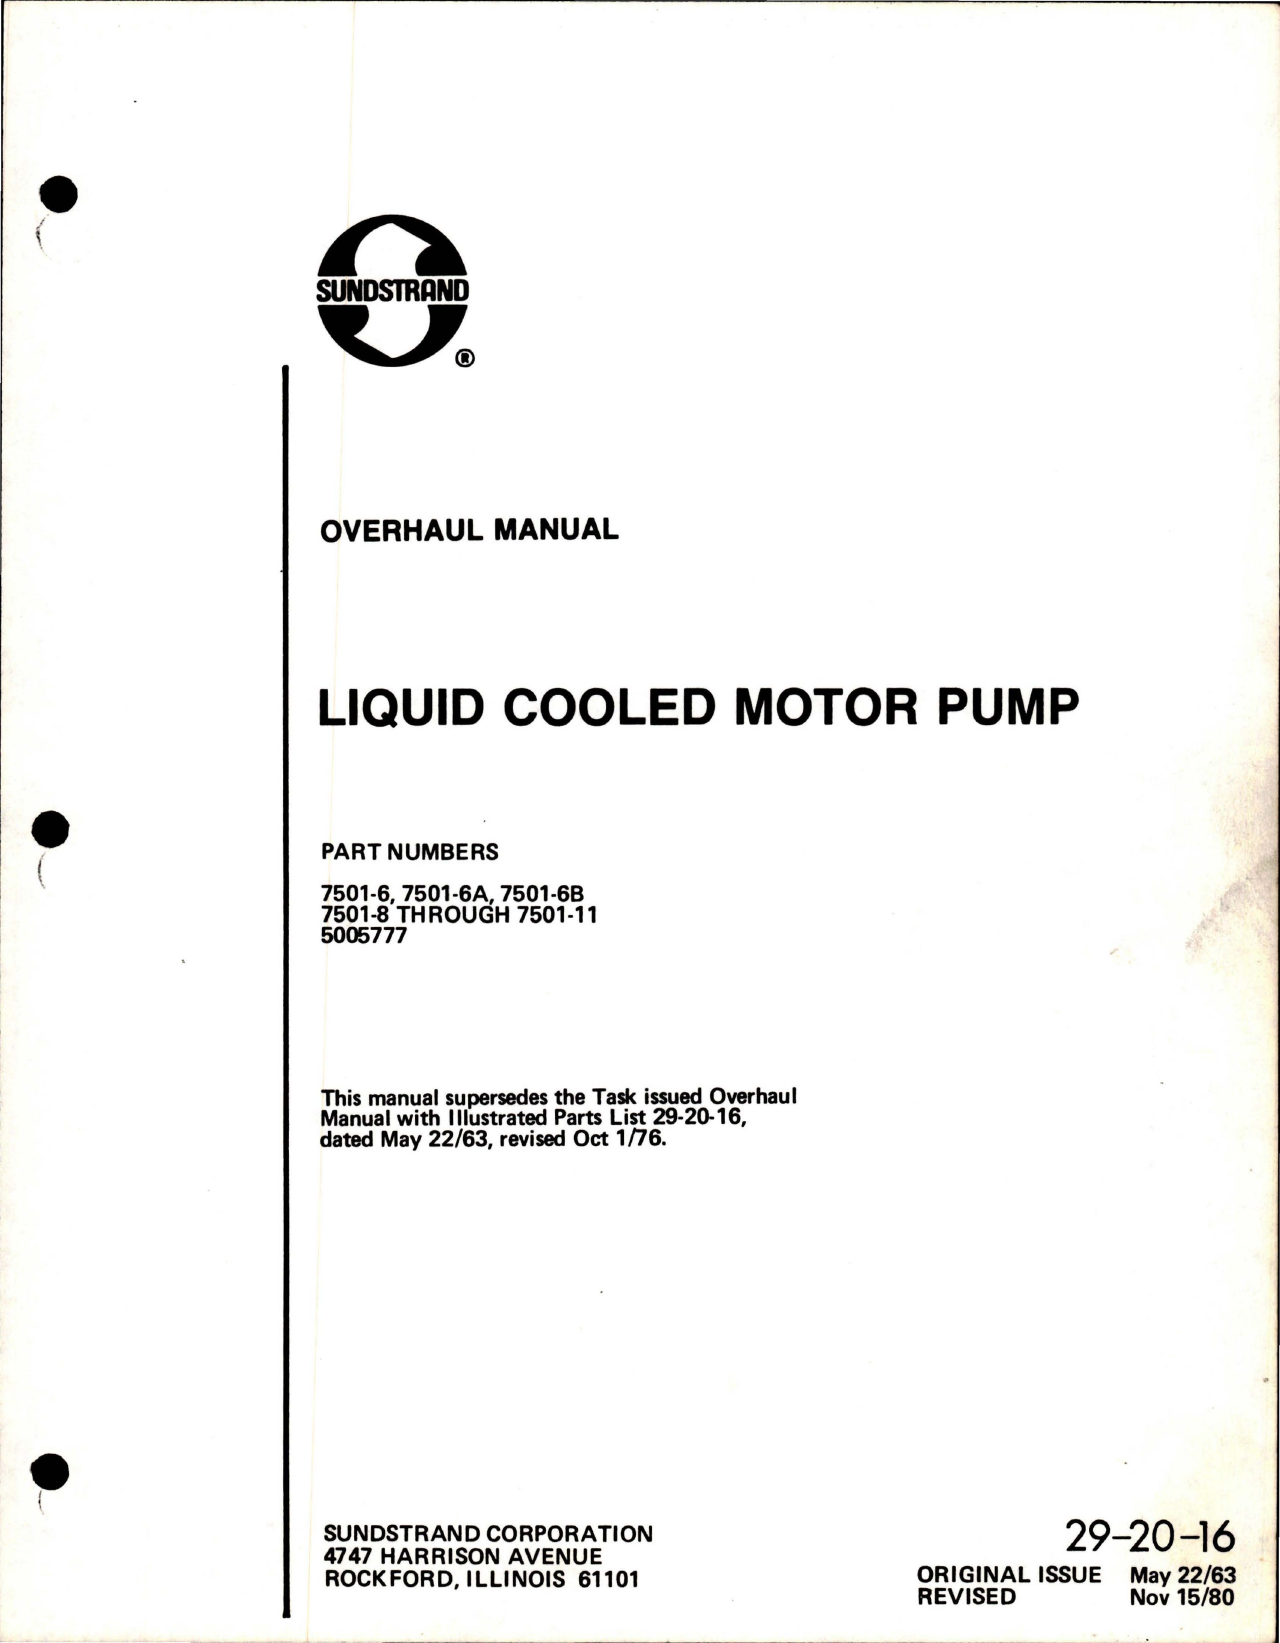 Sample page 1 from AirCorps Library document: Overhaul Manual with Parts for Liquid Cooled Motor Pump 